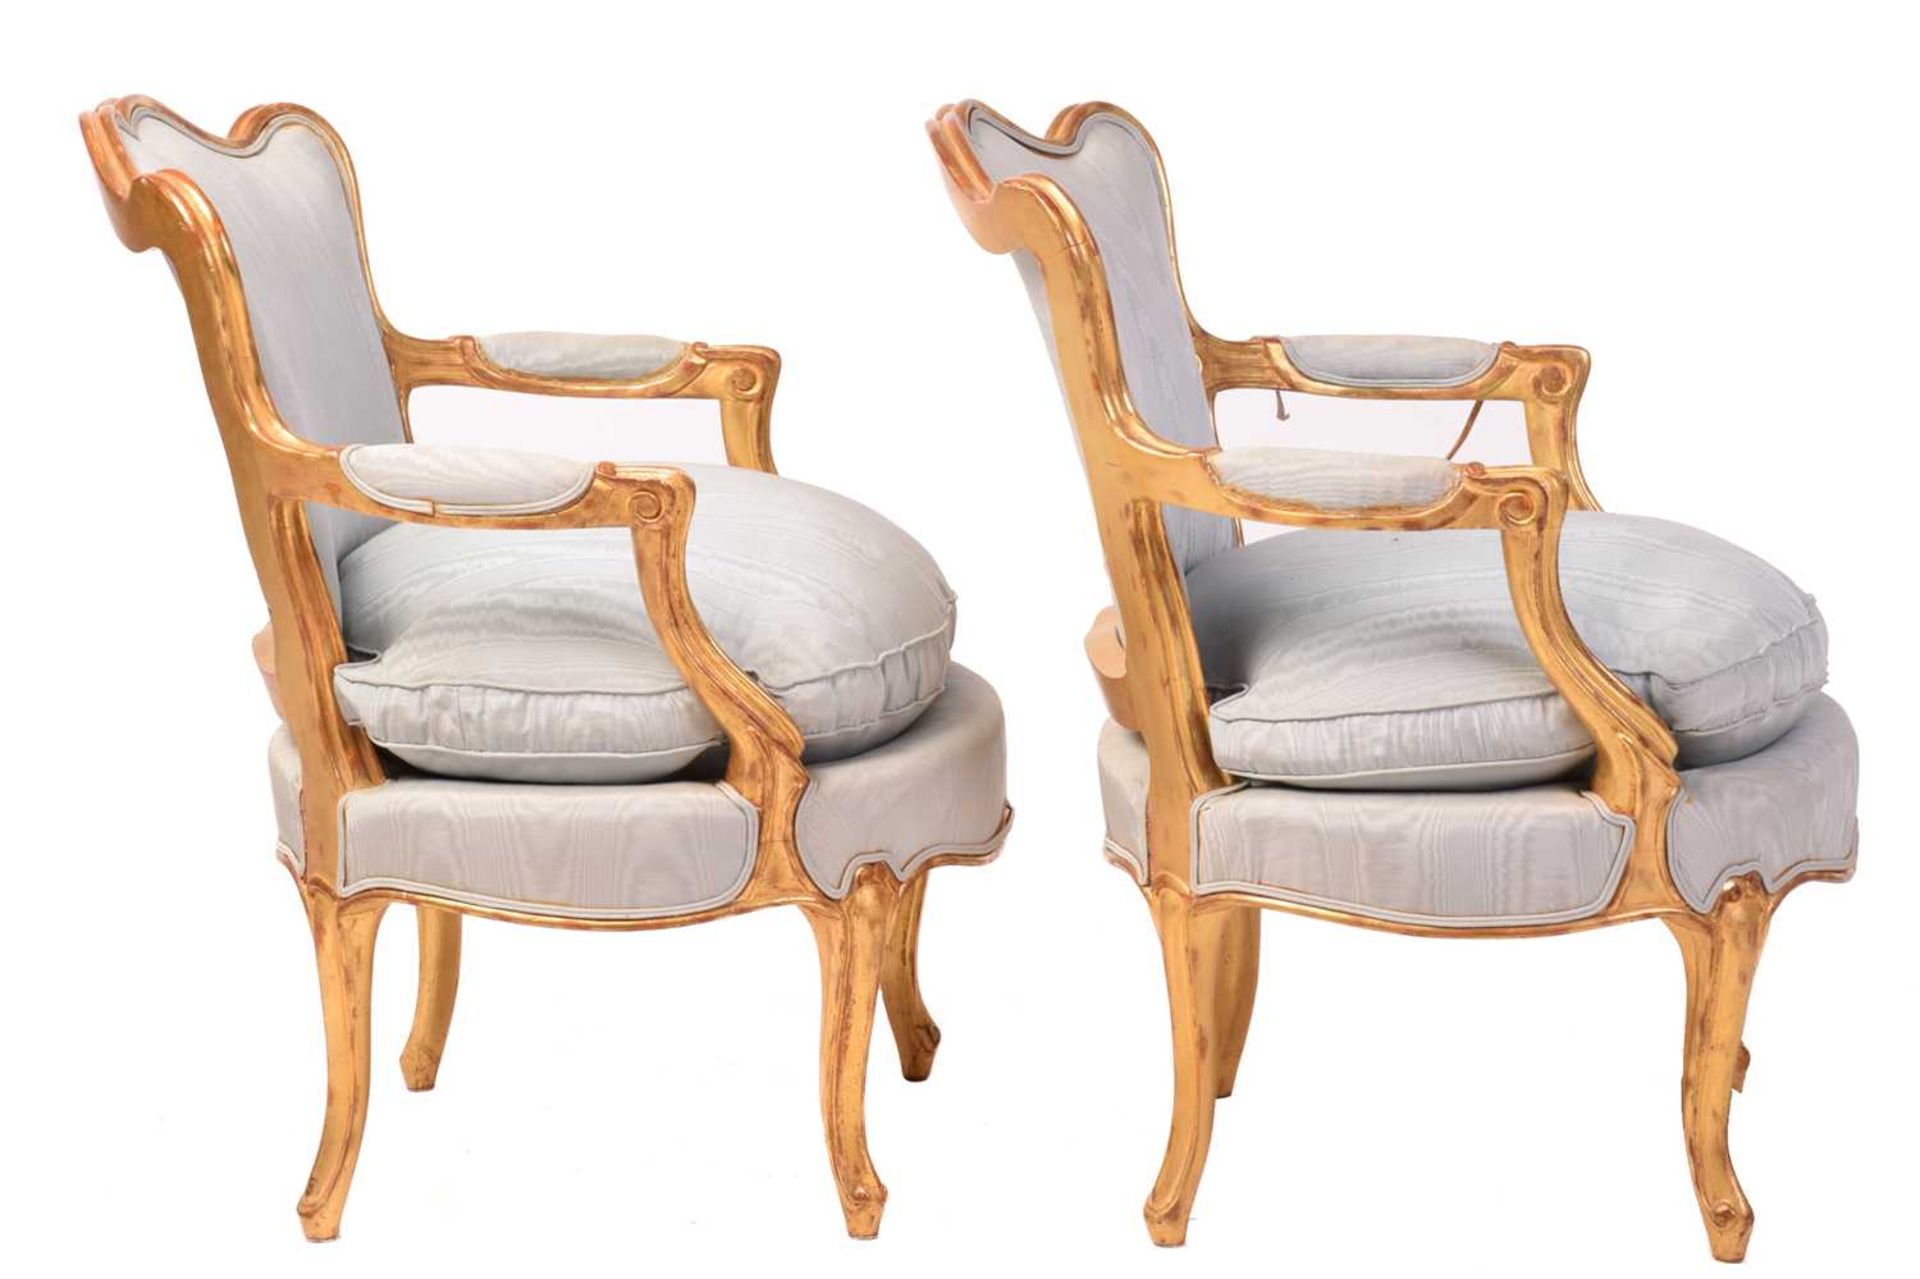 A pair of French Louis XV-style carved wood and gilt gesso fauteuils, 20th century with serpentine - Image 4 of 7